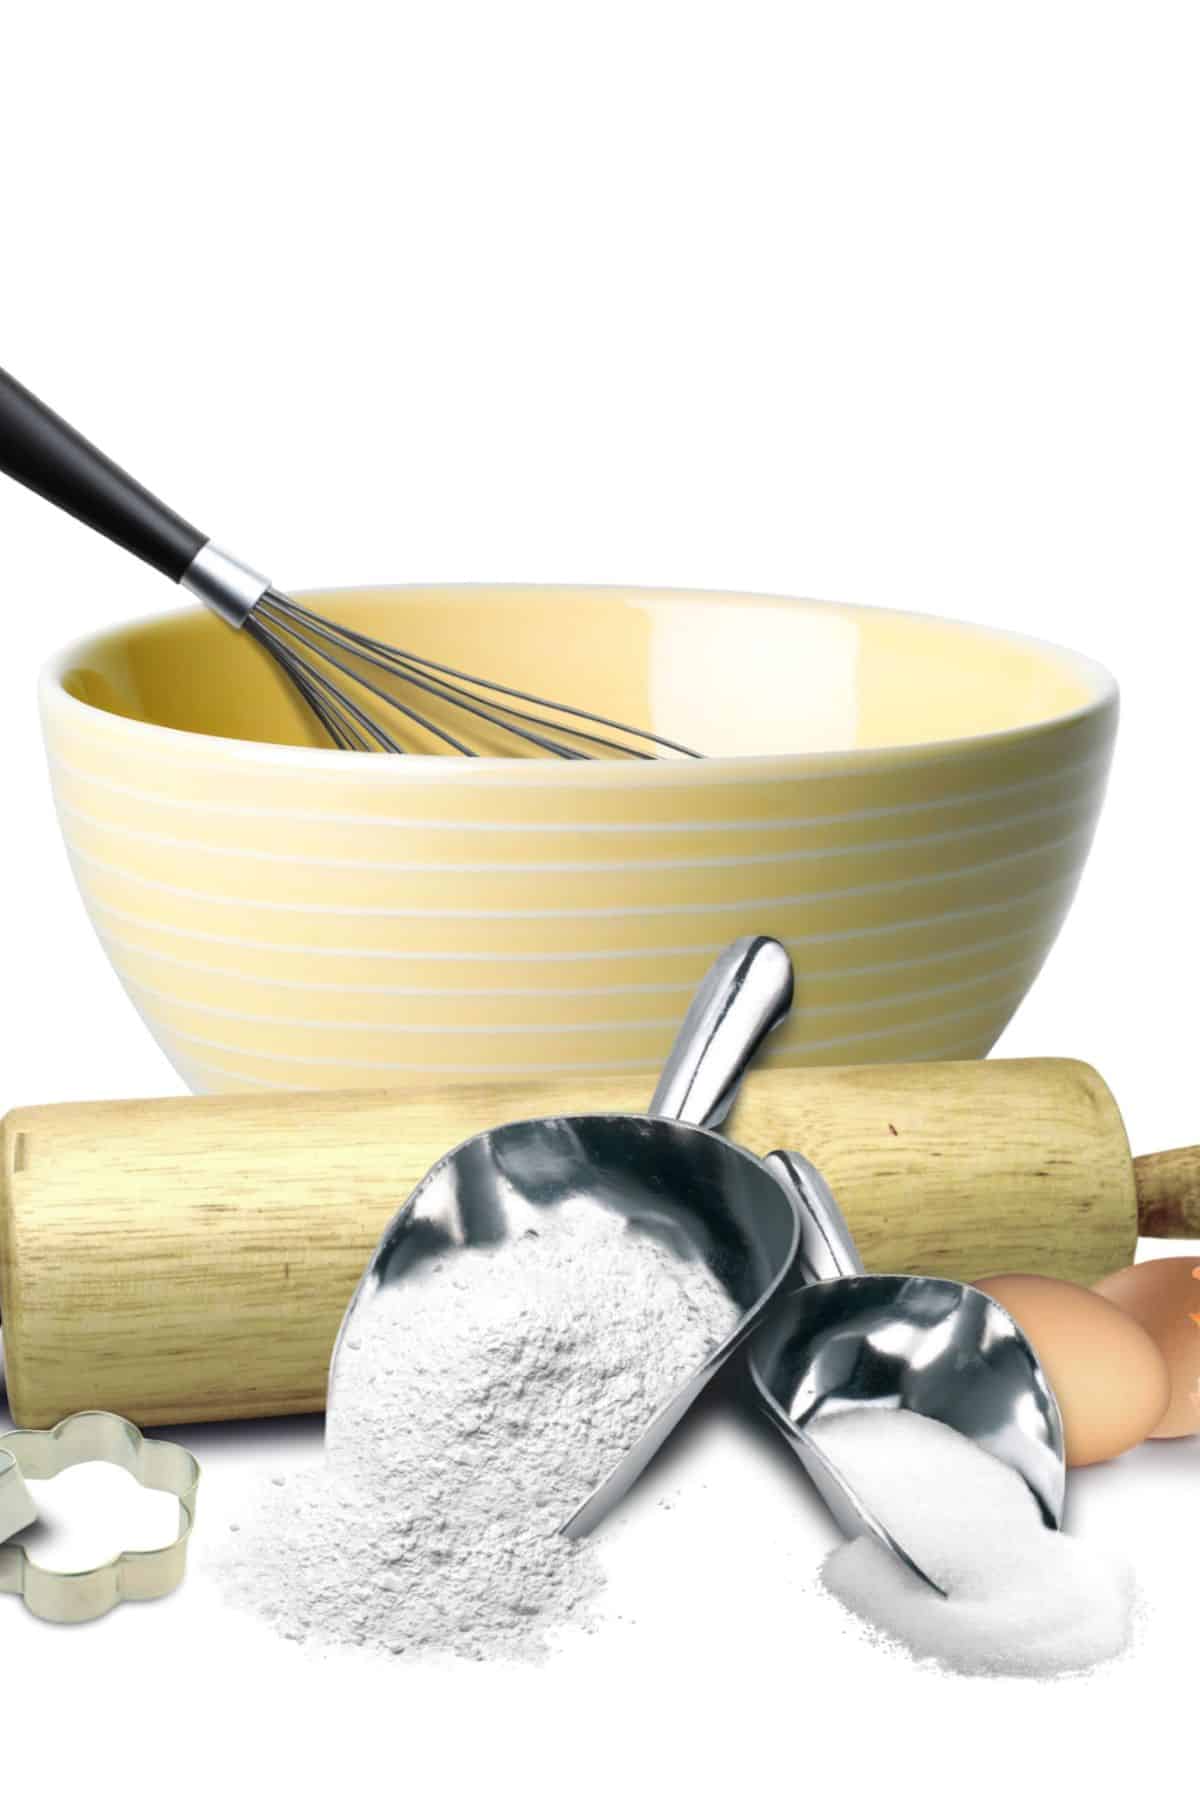 Bowl, rolling pin, measuring cup of flour, and eggs